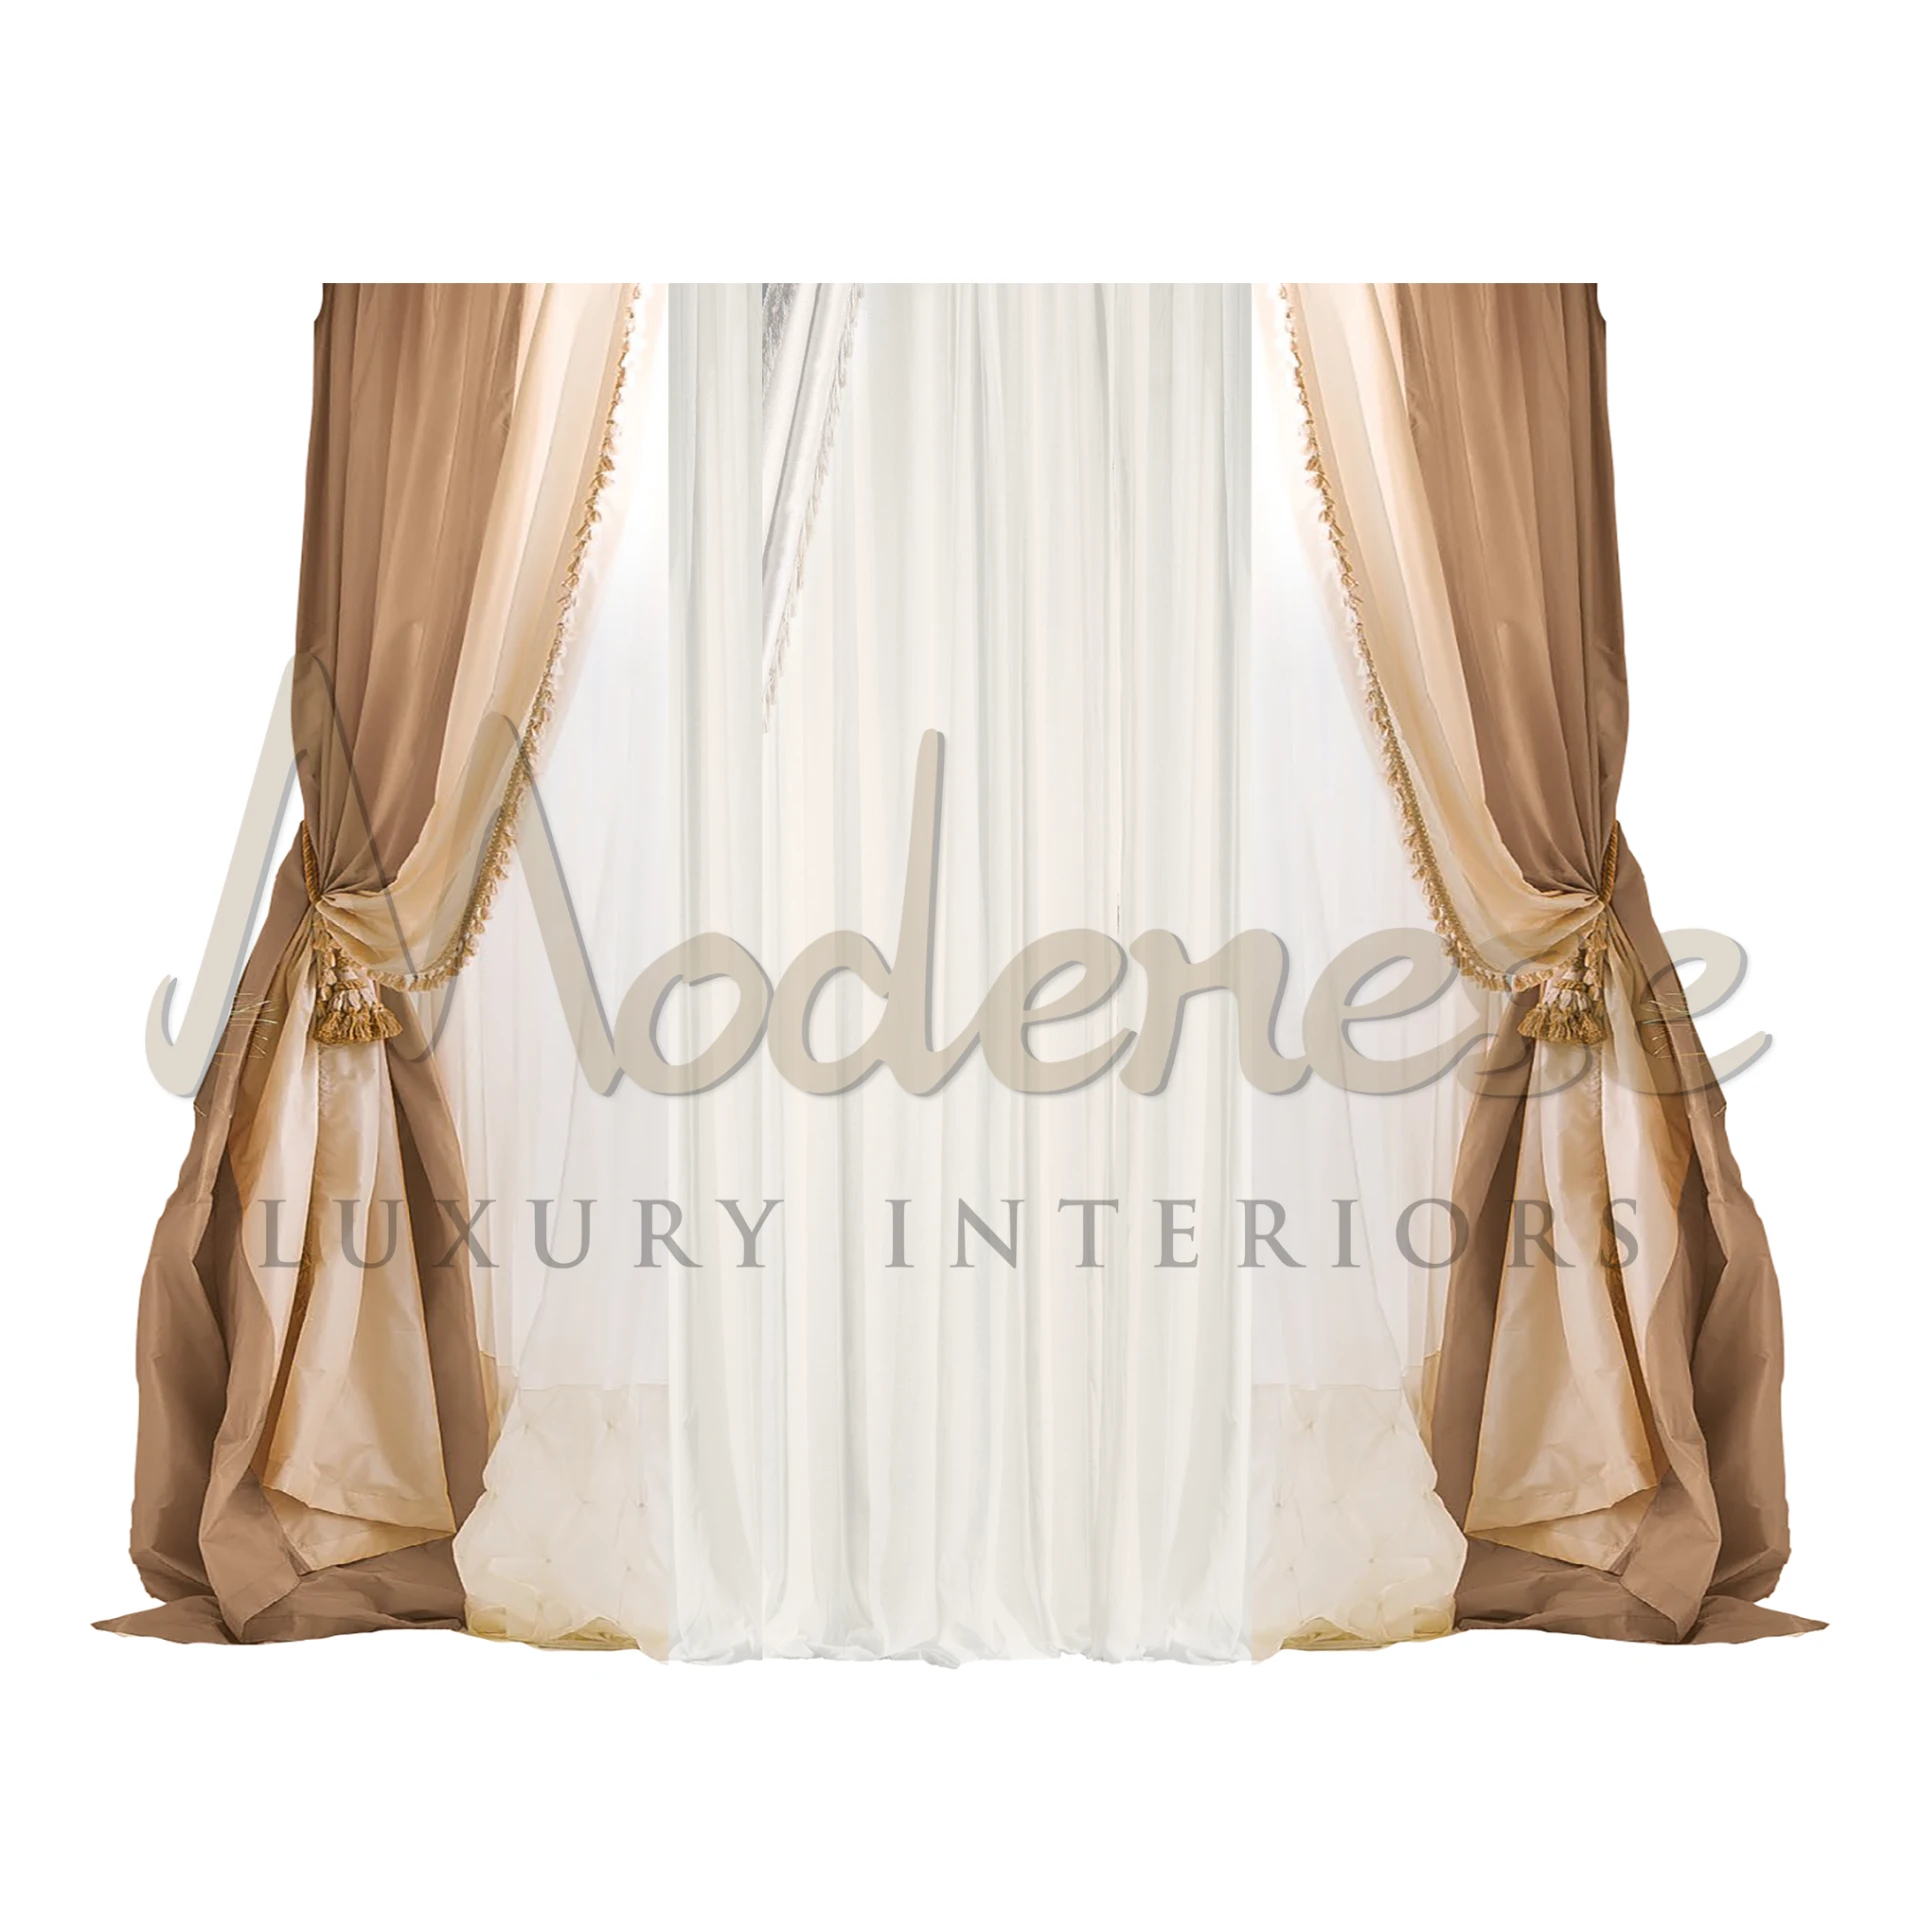 Elegant Cream Curtains by Modenese Interiors, adding a touch of refined elegance and luxury to the living space